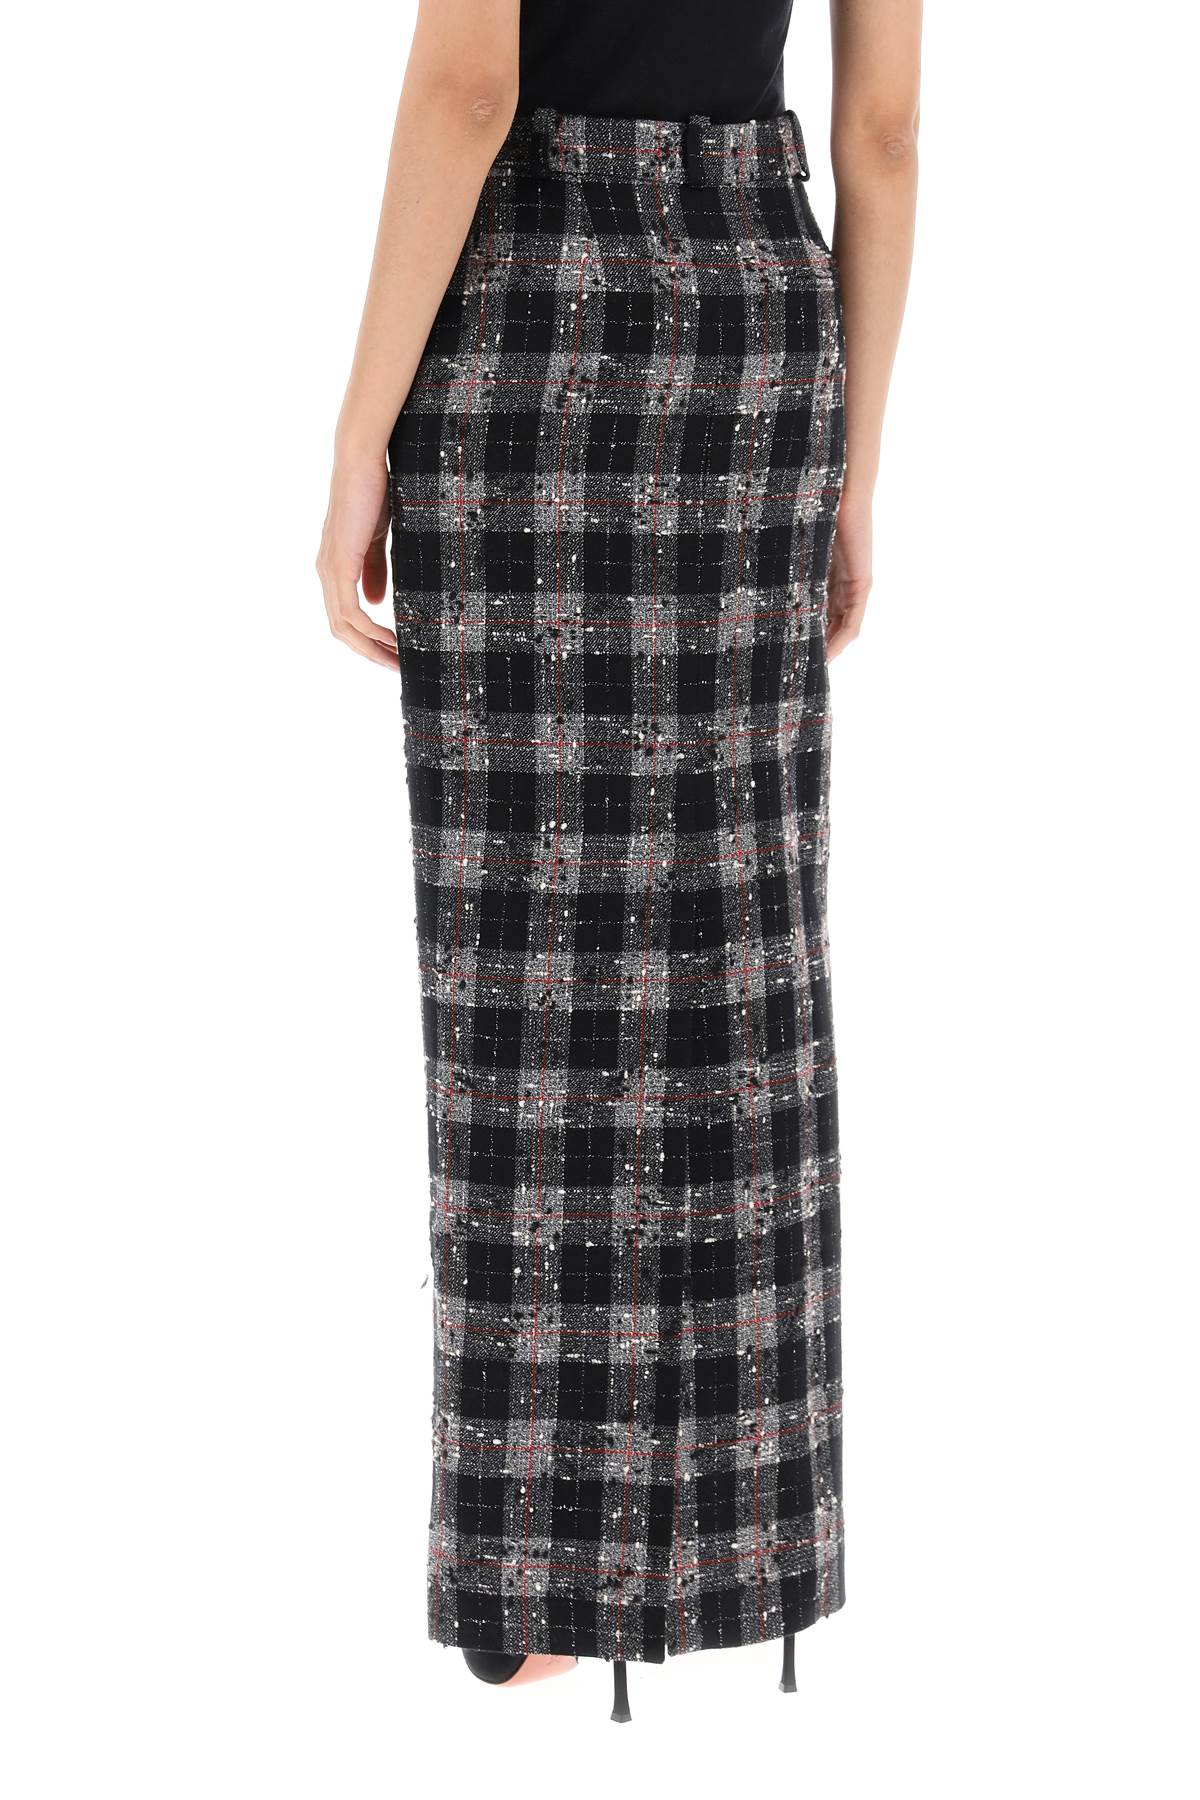 Alessandra rich maxi skirt in boucle' fabric with check motif-women > clothing > skirts > maxi-Alessandra Rich-Urbanheer